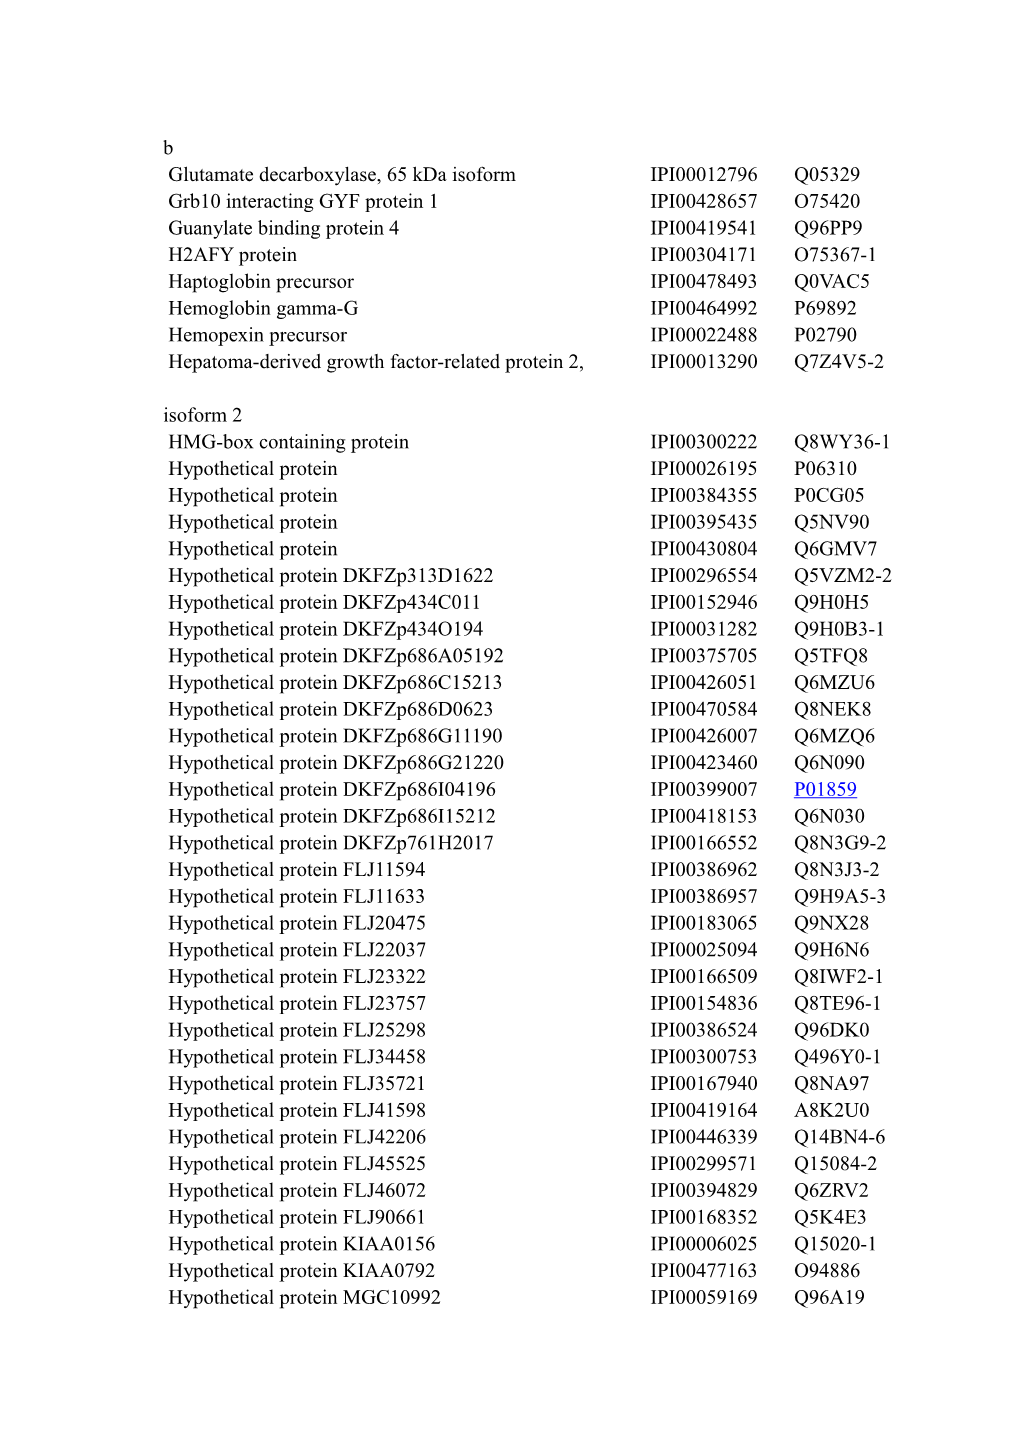 Additional File3. Proteins Identified in Human CSF